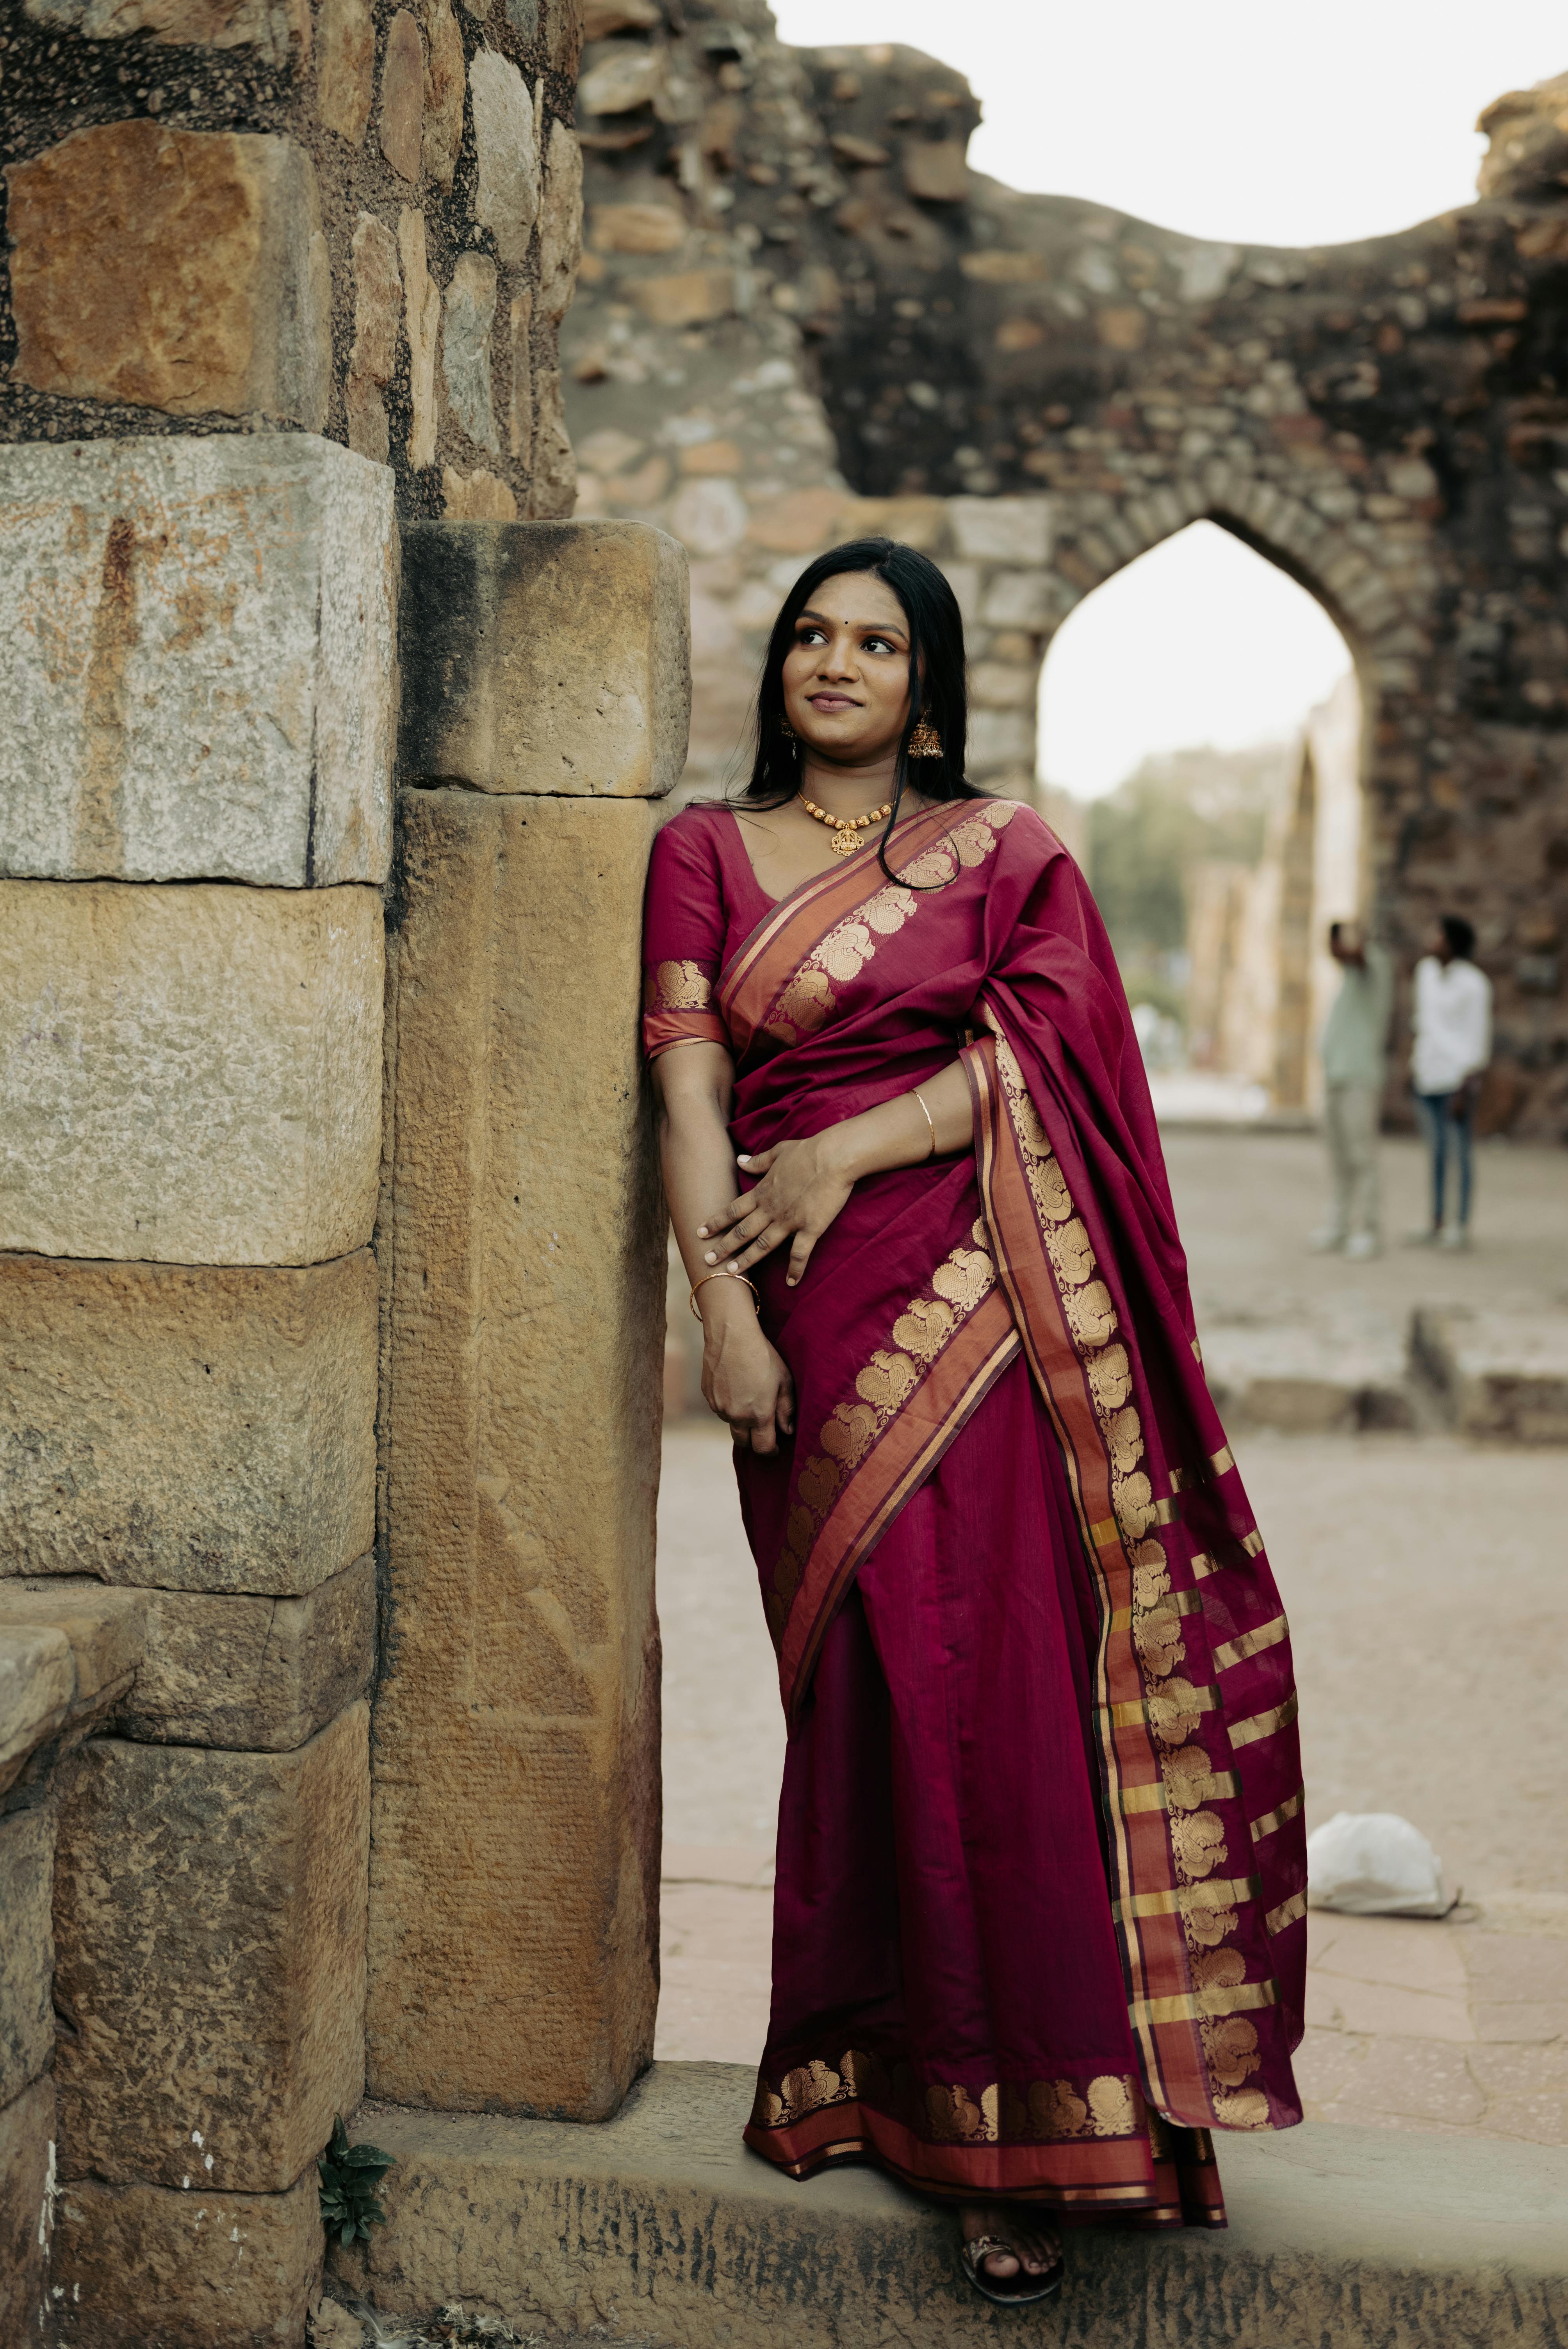 Beautiful Indian Woman Wearing Colorful Traditional Saree and